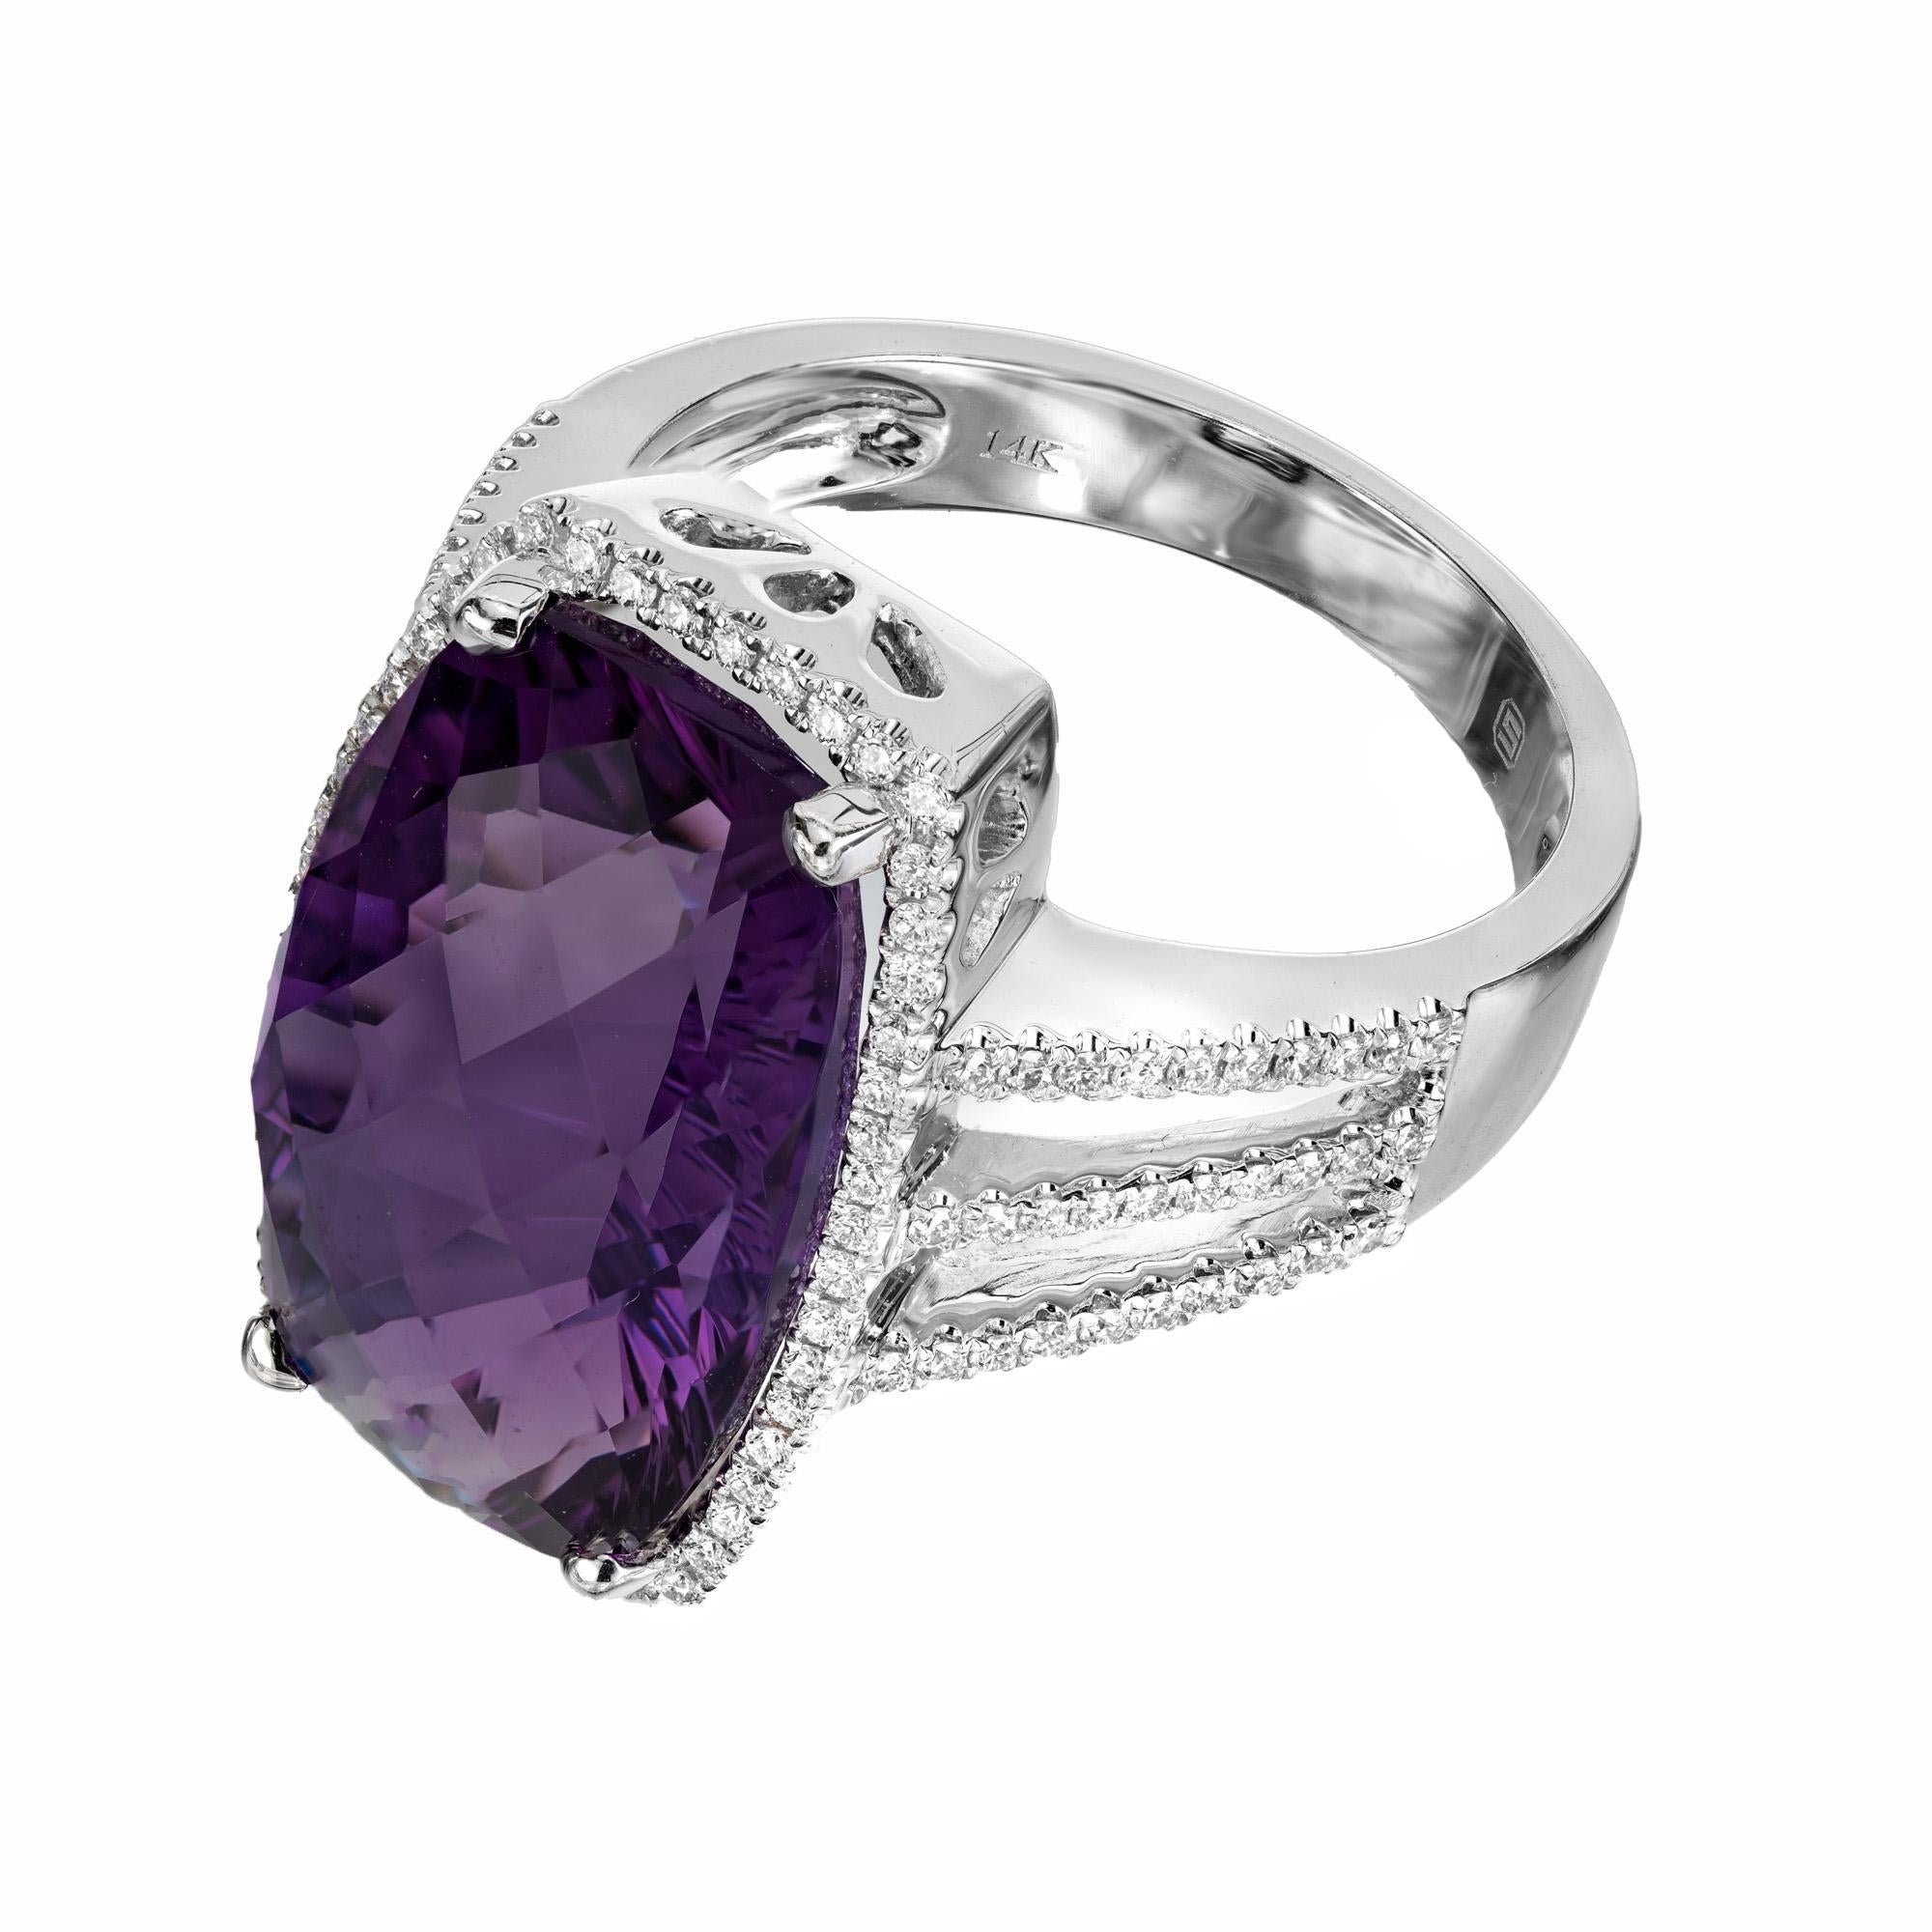 Faceted top cushion Amethyst diamond Halo ring with triple shank setting. Extra bright purple Amethyst. 
Amethyst and Diamond 14k white gold Halo Cocktail Ring. The centerpiece of the ring features a magnificent 8.43 carat cushion-cut amethyst,